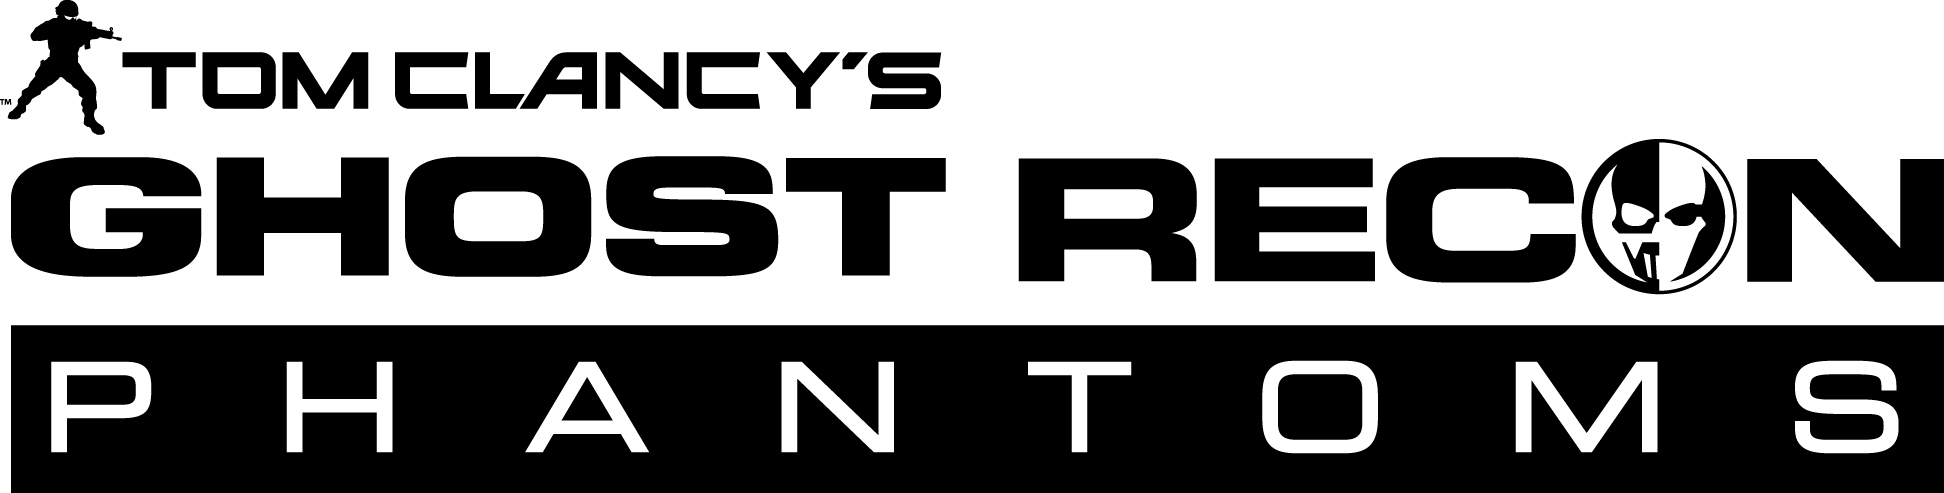 Tom Clancys Ghost Recon Logo Png Image - Tom Clancys Ghost Recon, Transparent background PNG HD thumbnail